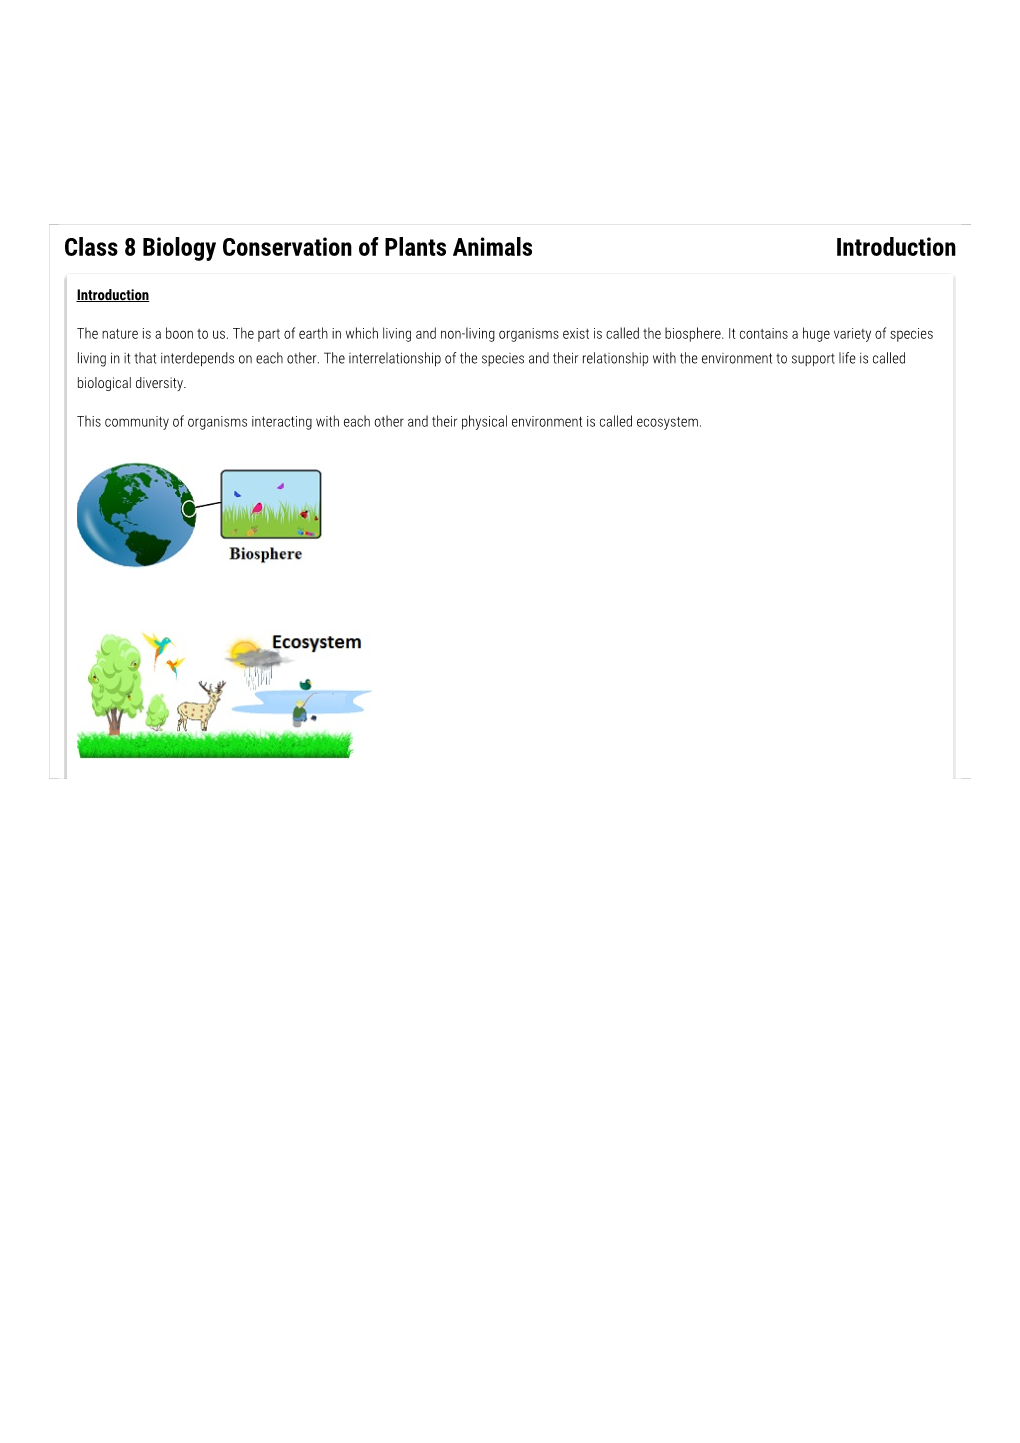 Class 8 Biology Conservation of Plants Animals Introduction